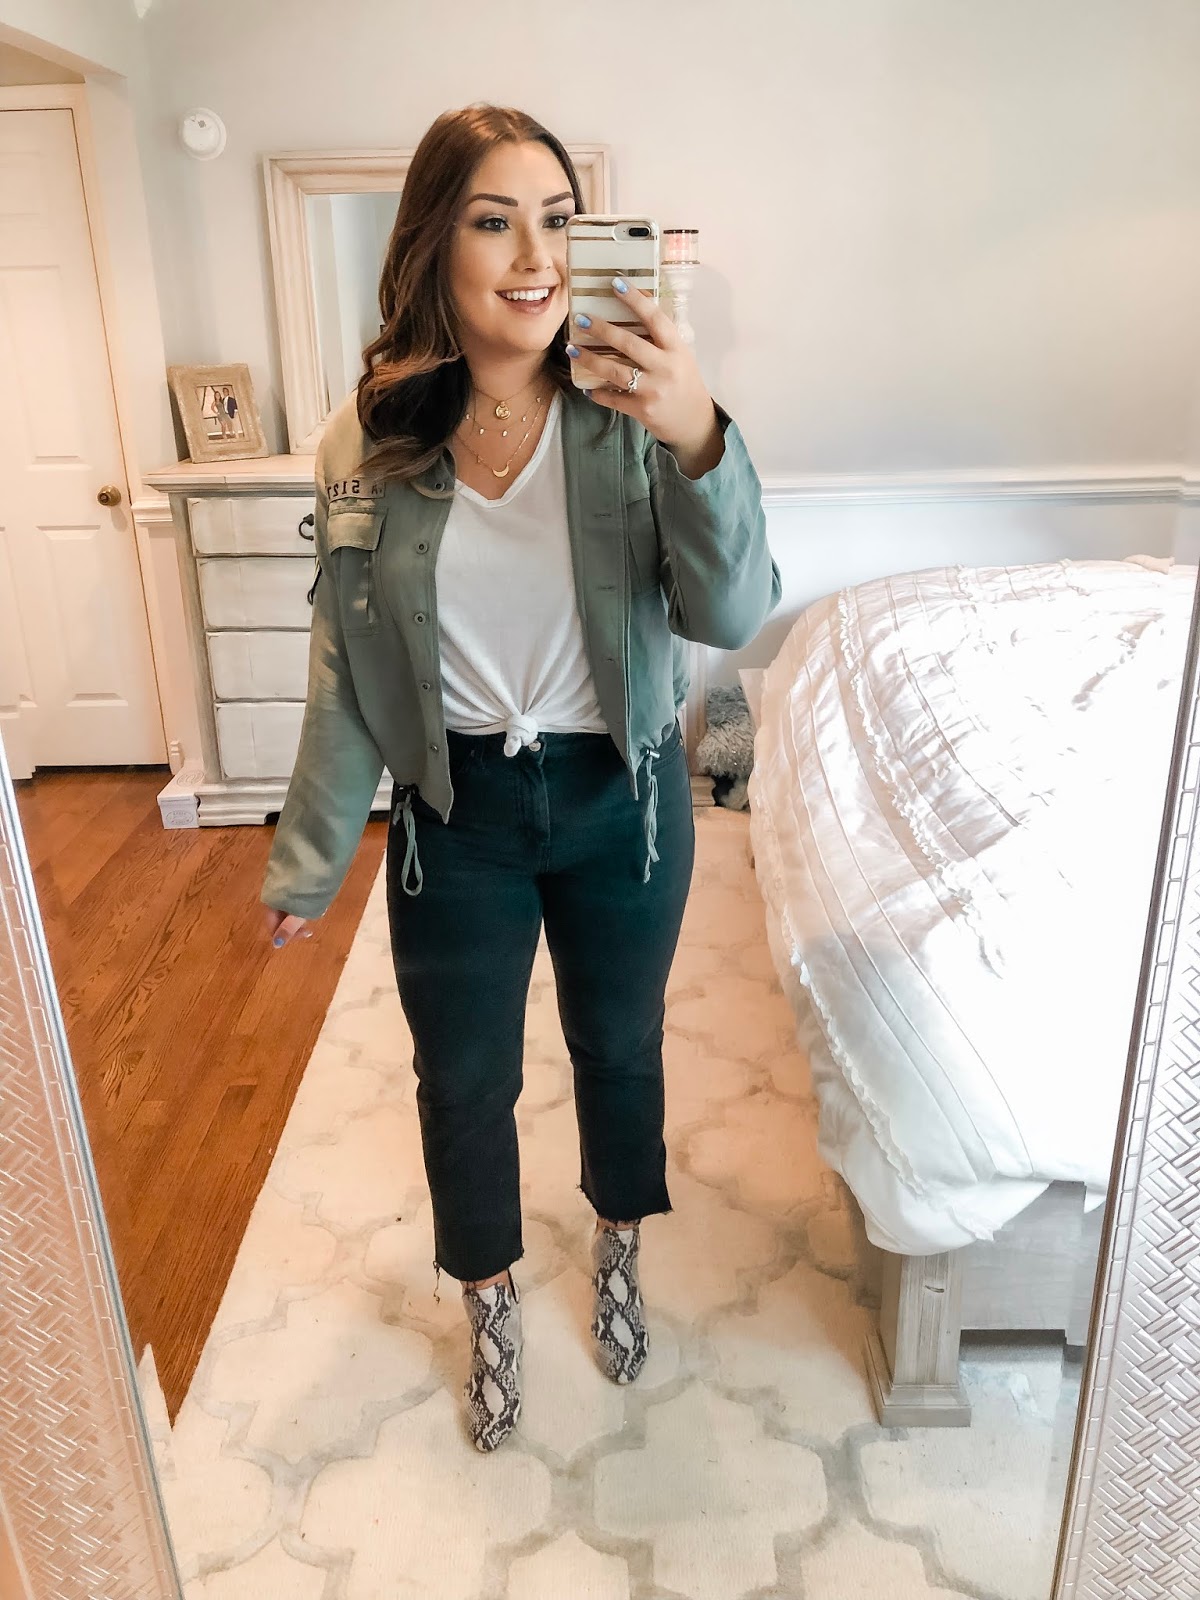 NORDSTROM ANNIVERSARY SALE TRY-ON HAUL!